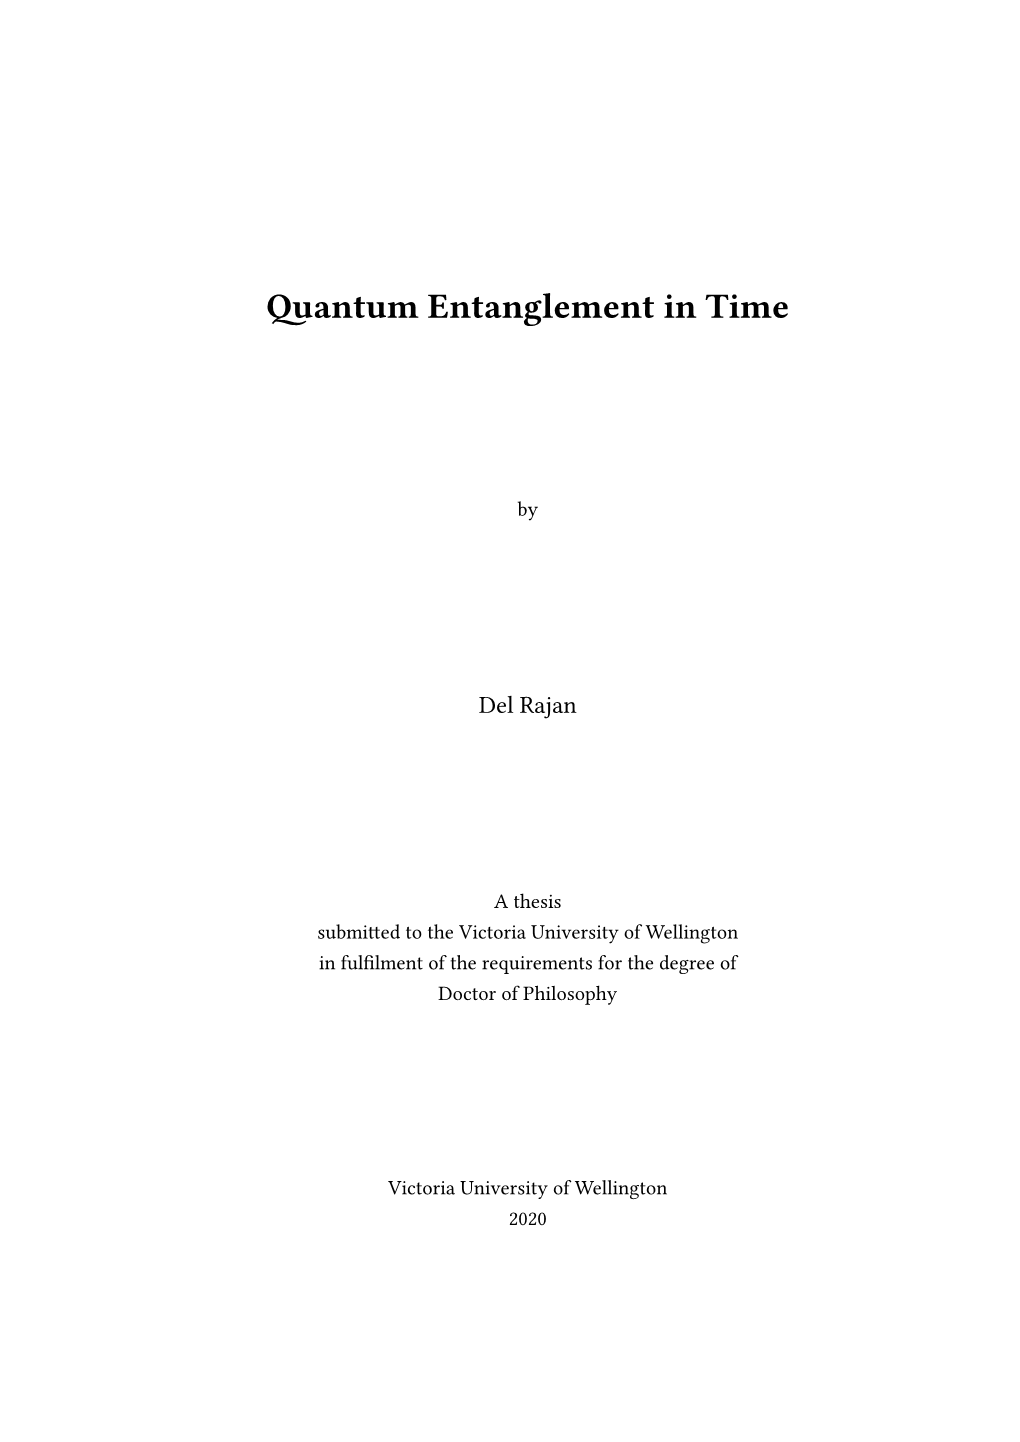 Antum Entanglement in Time